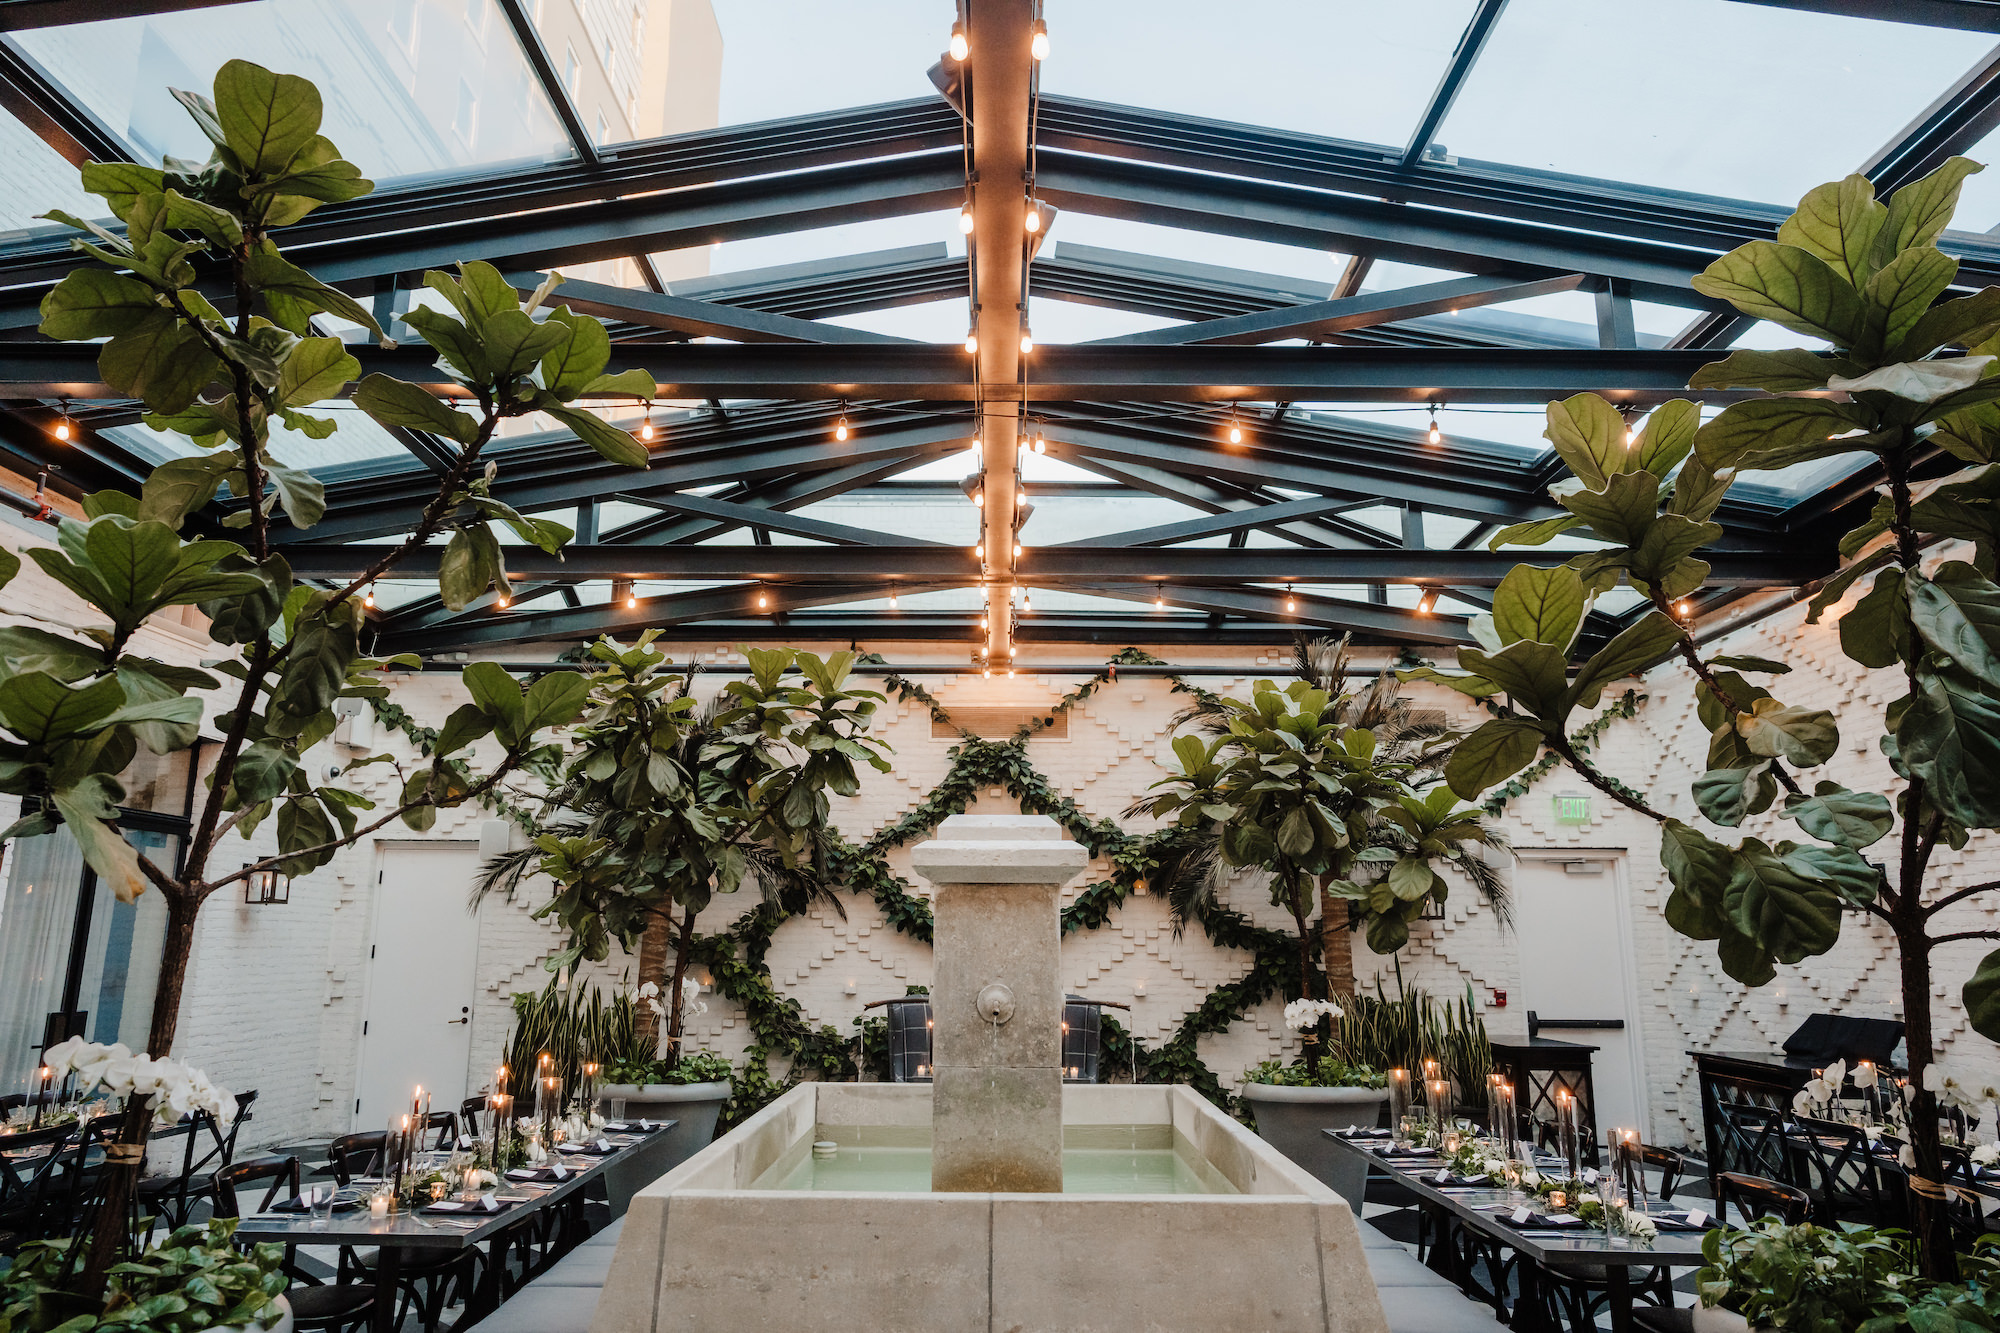 Timeless Industrial Indoor Wedding Reception with Black Crossback Chairs, Candles, and Greenery Tablescape Centerpiece Inspiration | South Tampa Wedding Planner Special Moments | Venue Oxford Exchange Conservatory